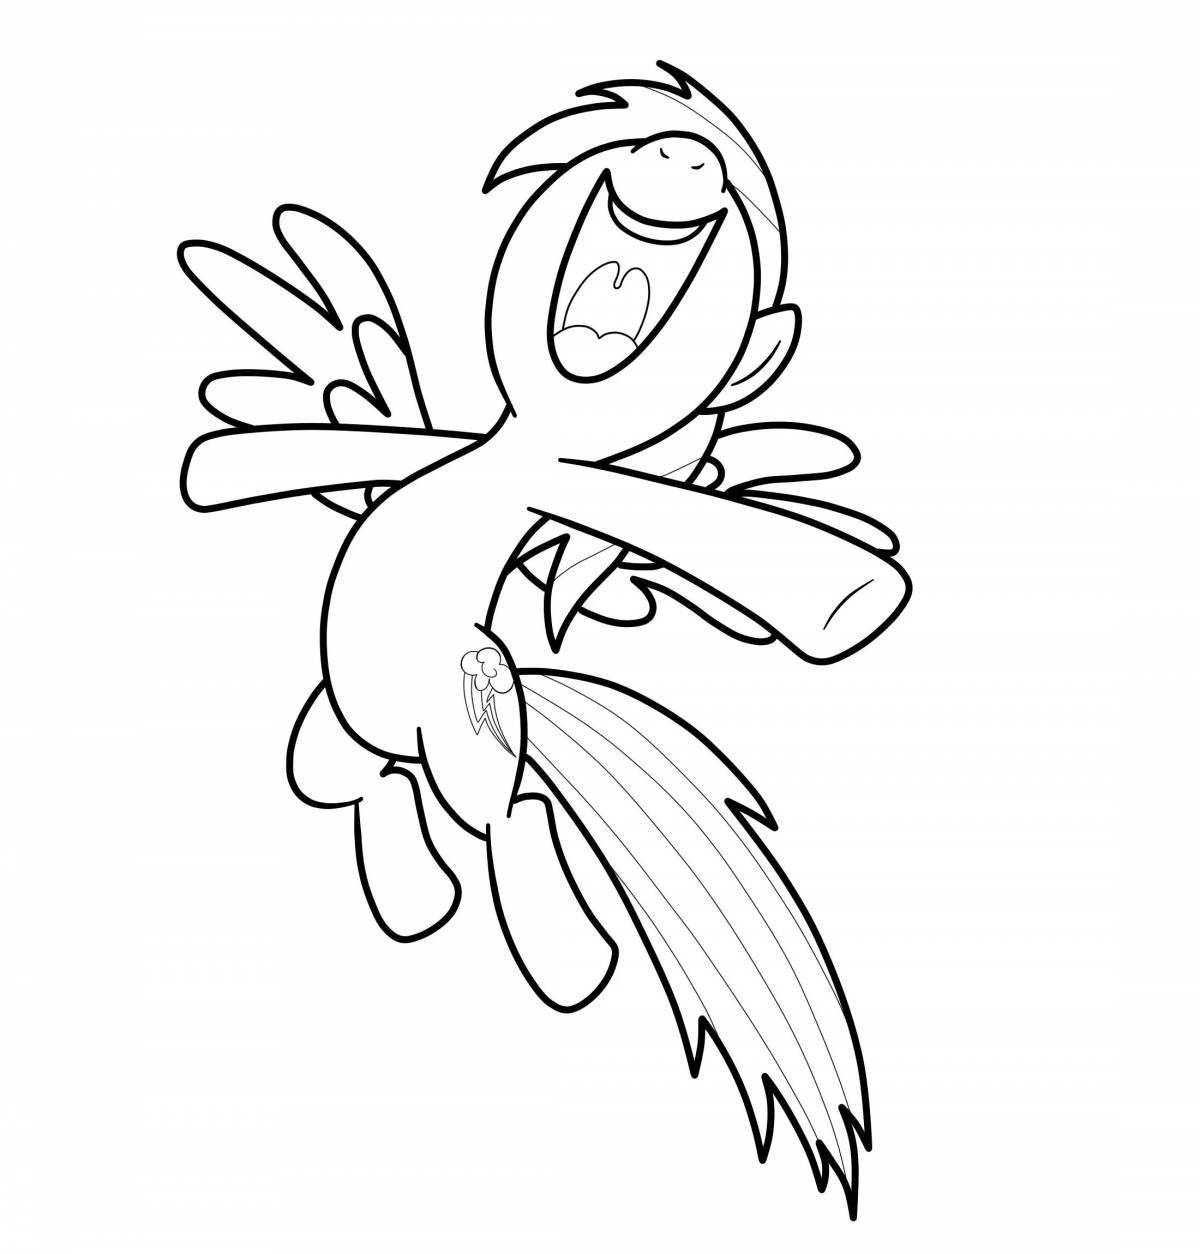 My little pony rainbow dash coloring page